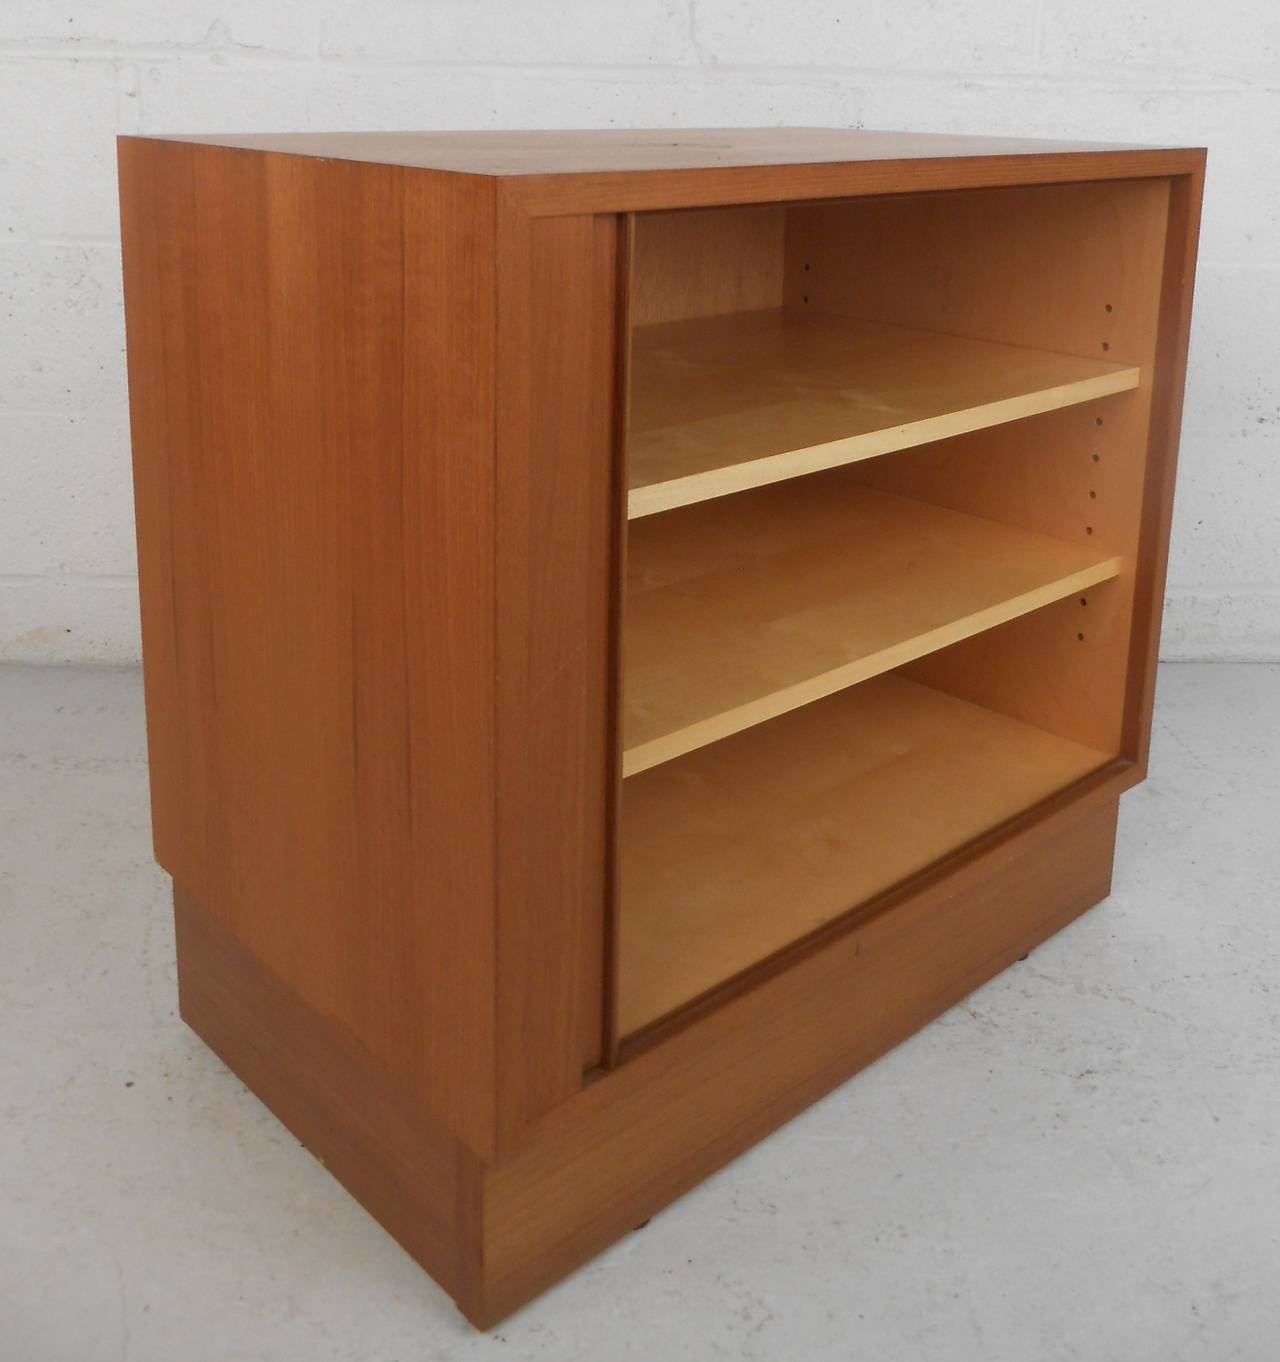 Mid-Century Modern teak storage cabinet with tambour door and two adjustable beech shelves. Danish furniture makers mark. Please confirm item location (NY or NJ) with dealer.